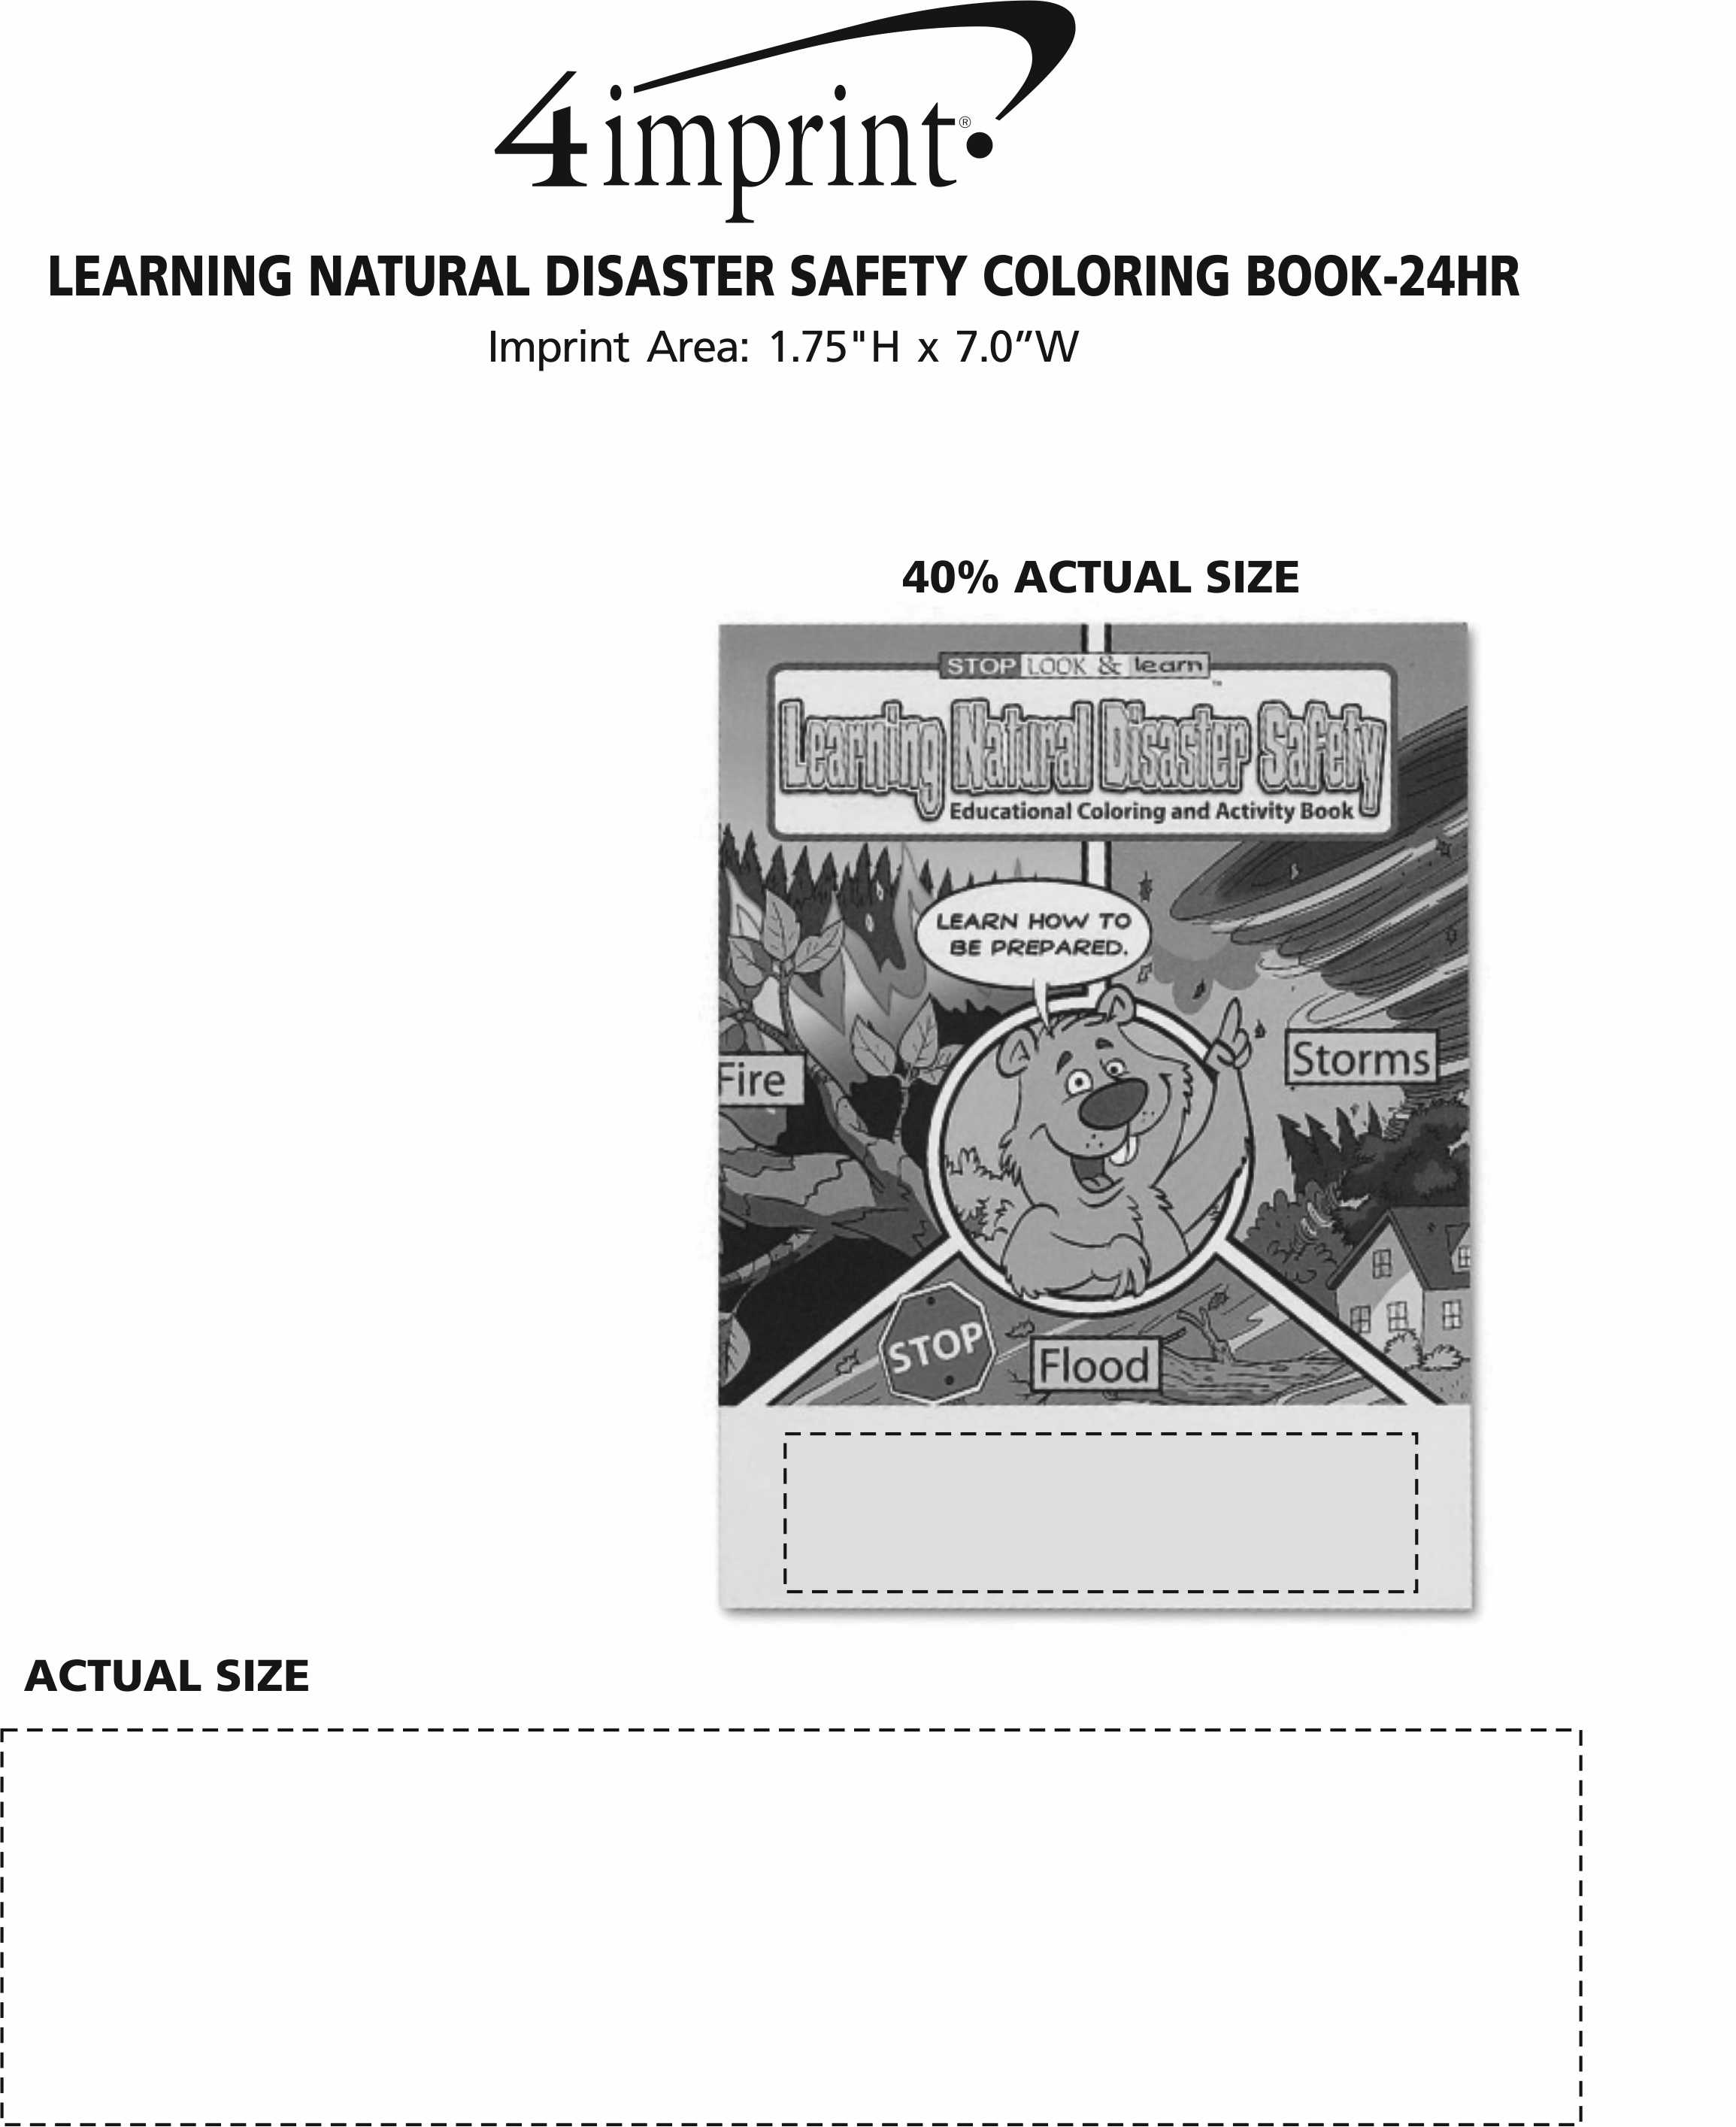 Imprint Area of Learning Natural Disaster Safety Coloring Book - 24 hr